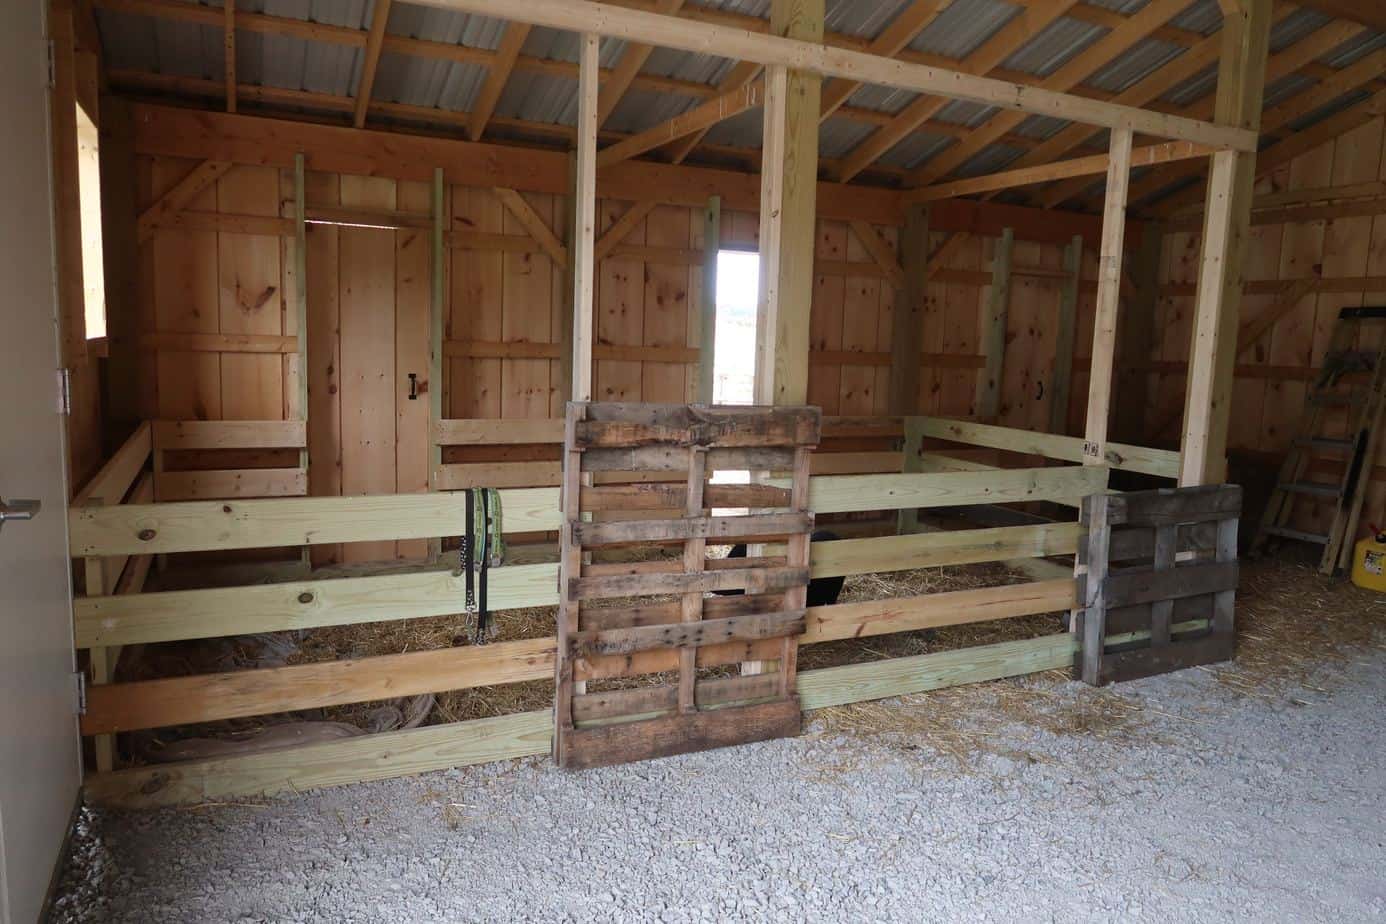 How to Build a Mini Pig Pen Using Pallets in Under 60 minutes